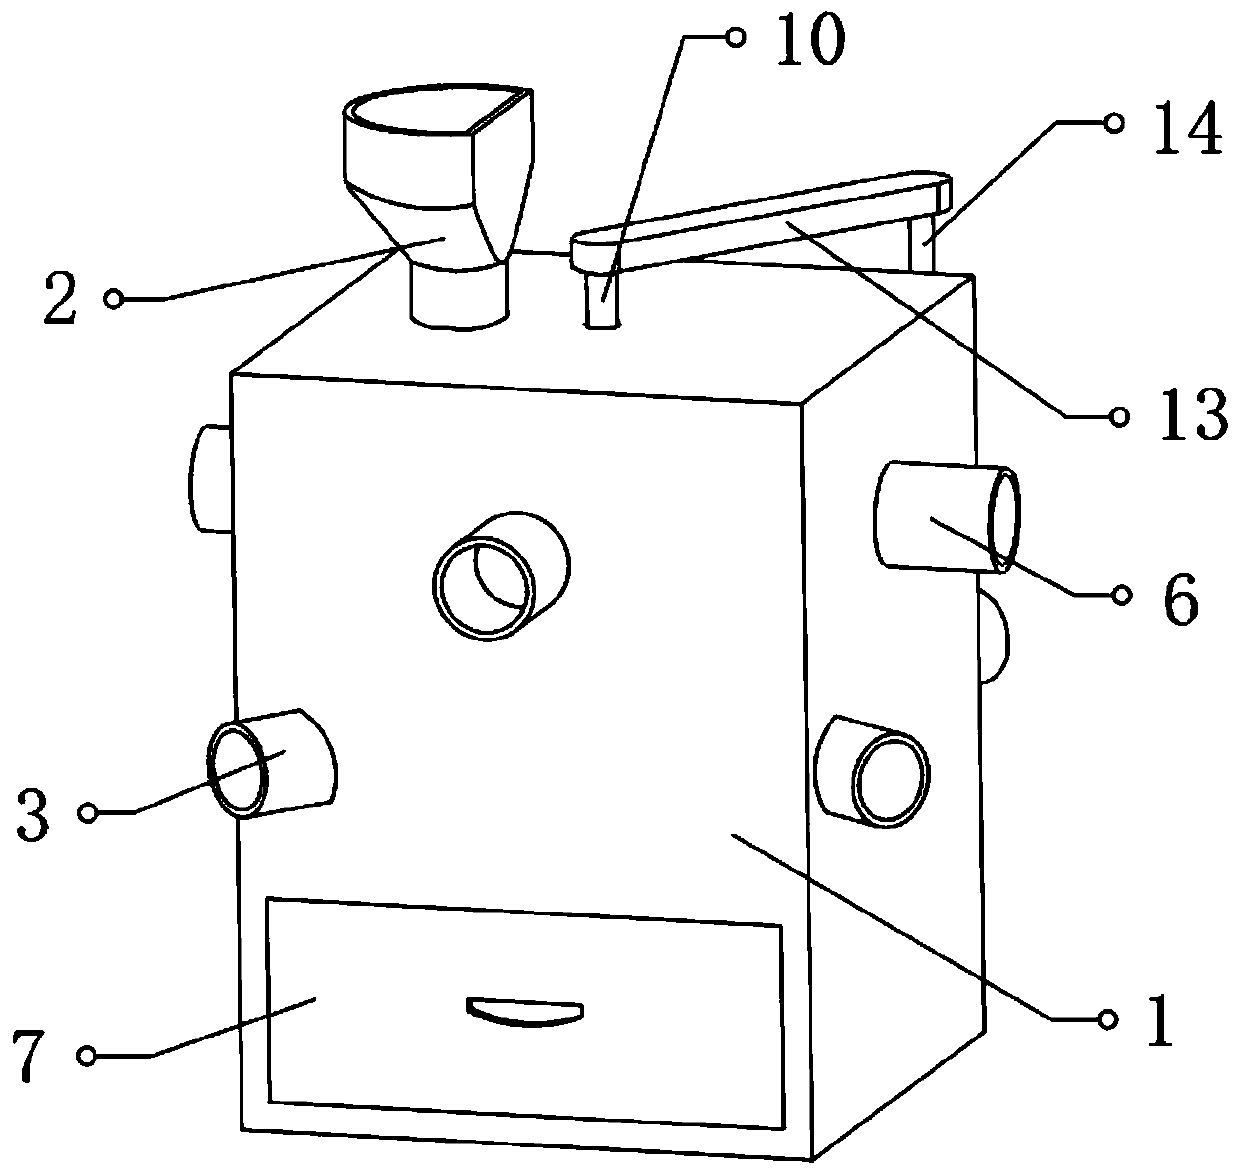 Seed screening device for agricultural production